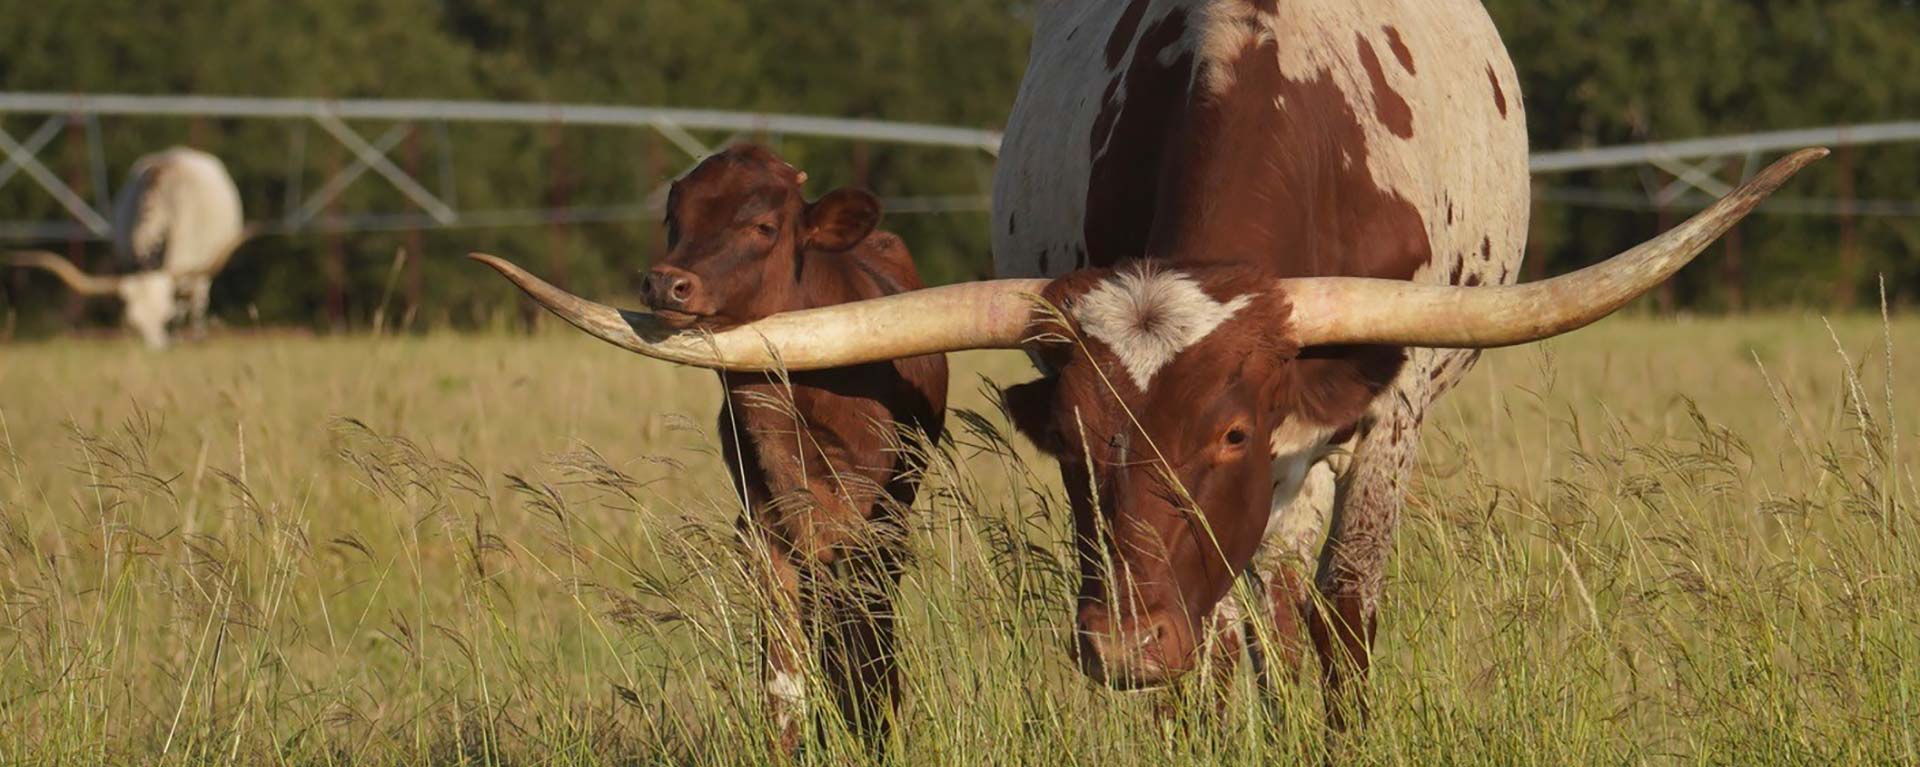 Longhorn Cows For Sale Banner image